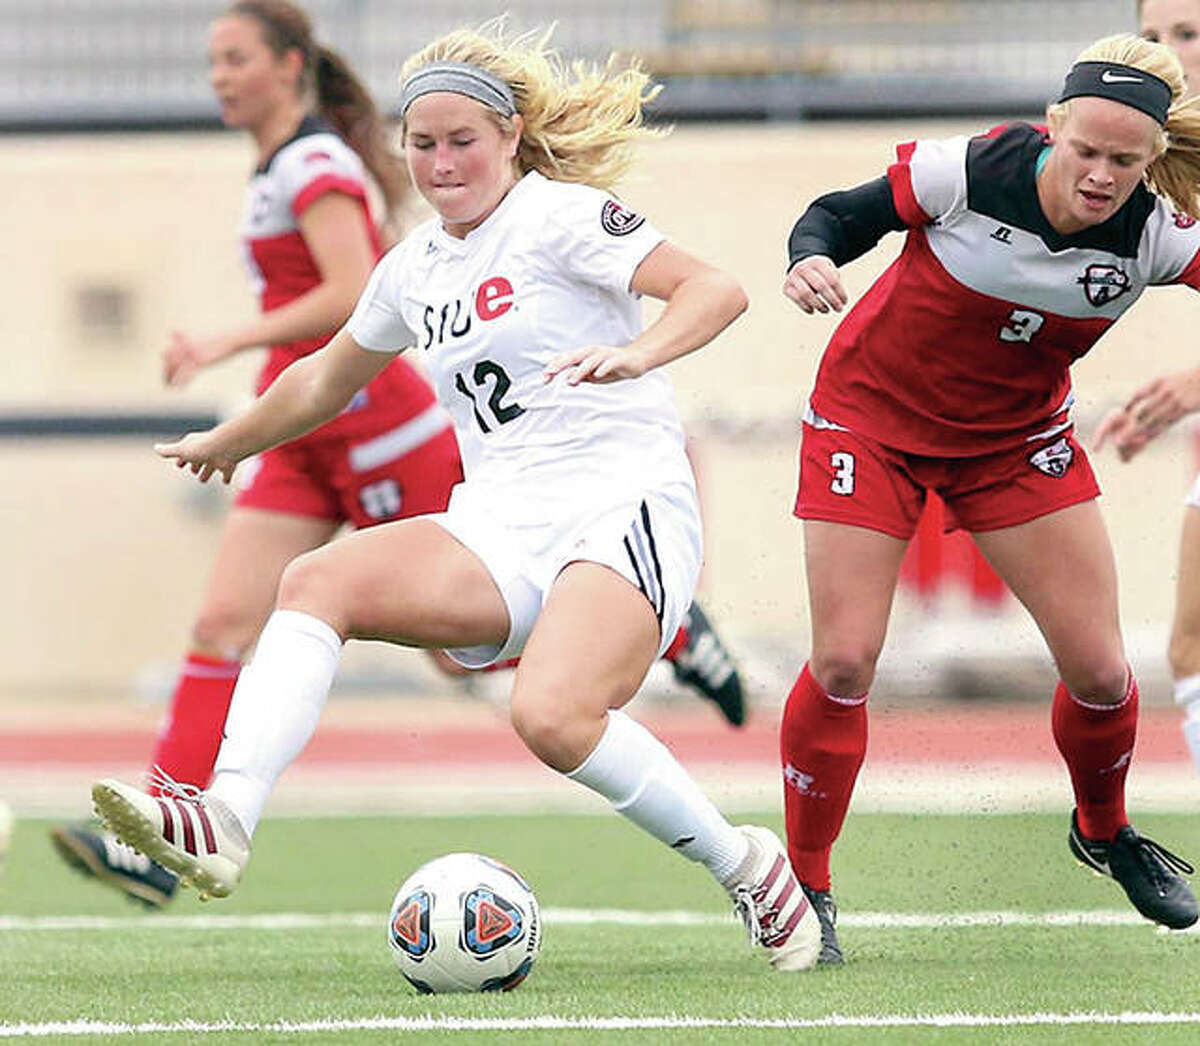 Civic Memorial high grad Lindsey Fencel (12) returns for her senior season this fall for the SIUE women’s soccer team. The defending Ohio Valley Champion Cougars have announced their 2017 schedule, which includes nine home games.